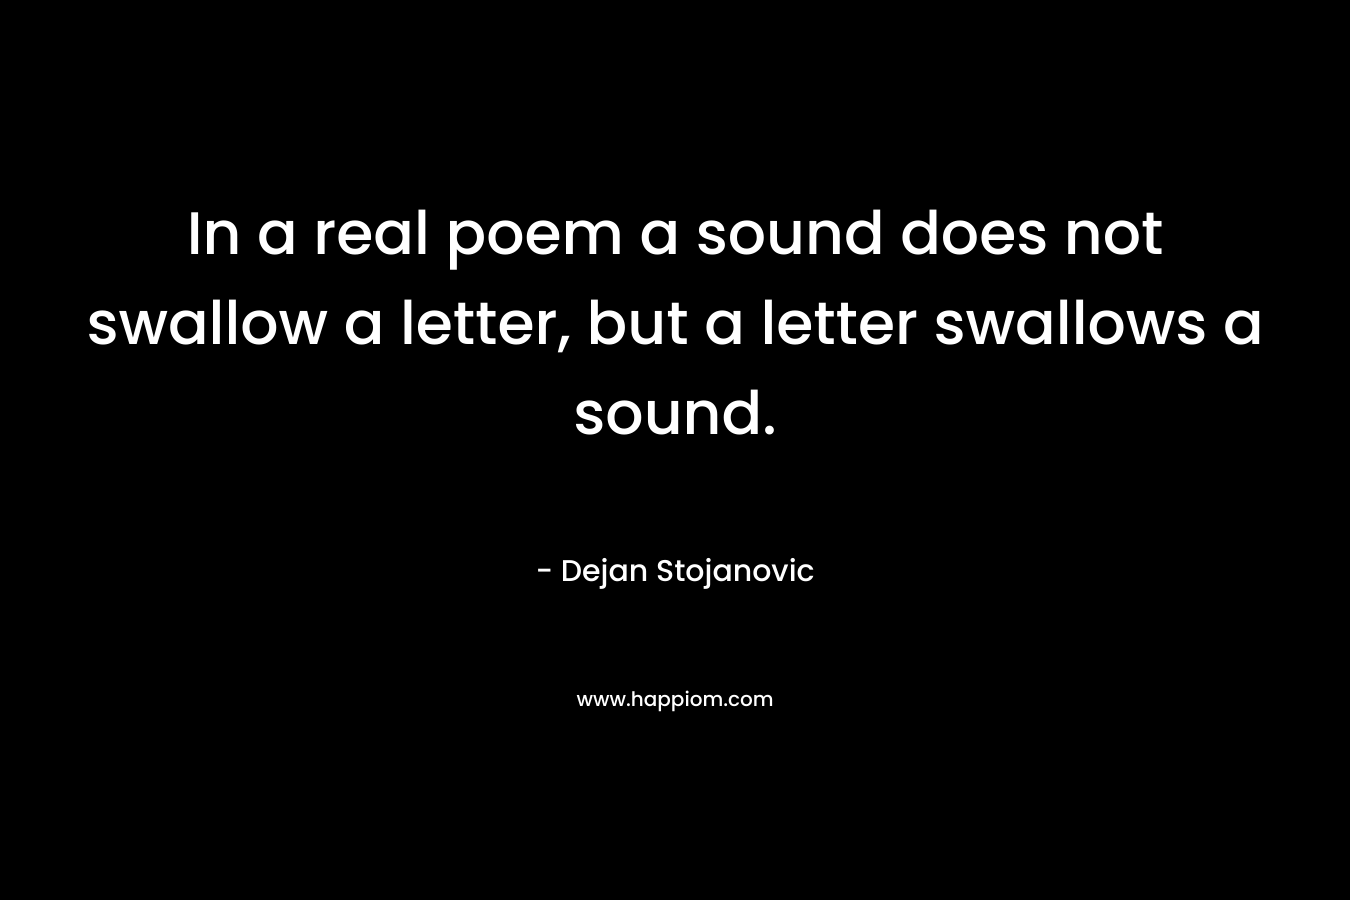 In a real poem a sound does not swallow a letter, but a letter swallows a sound. – Dejan Stojanovic